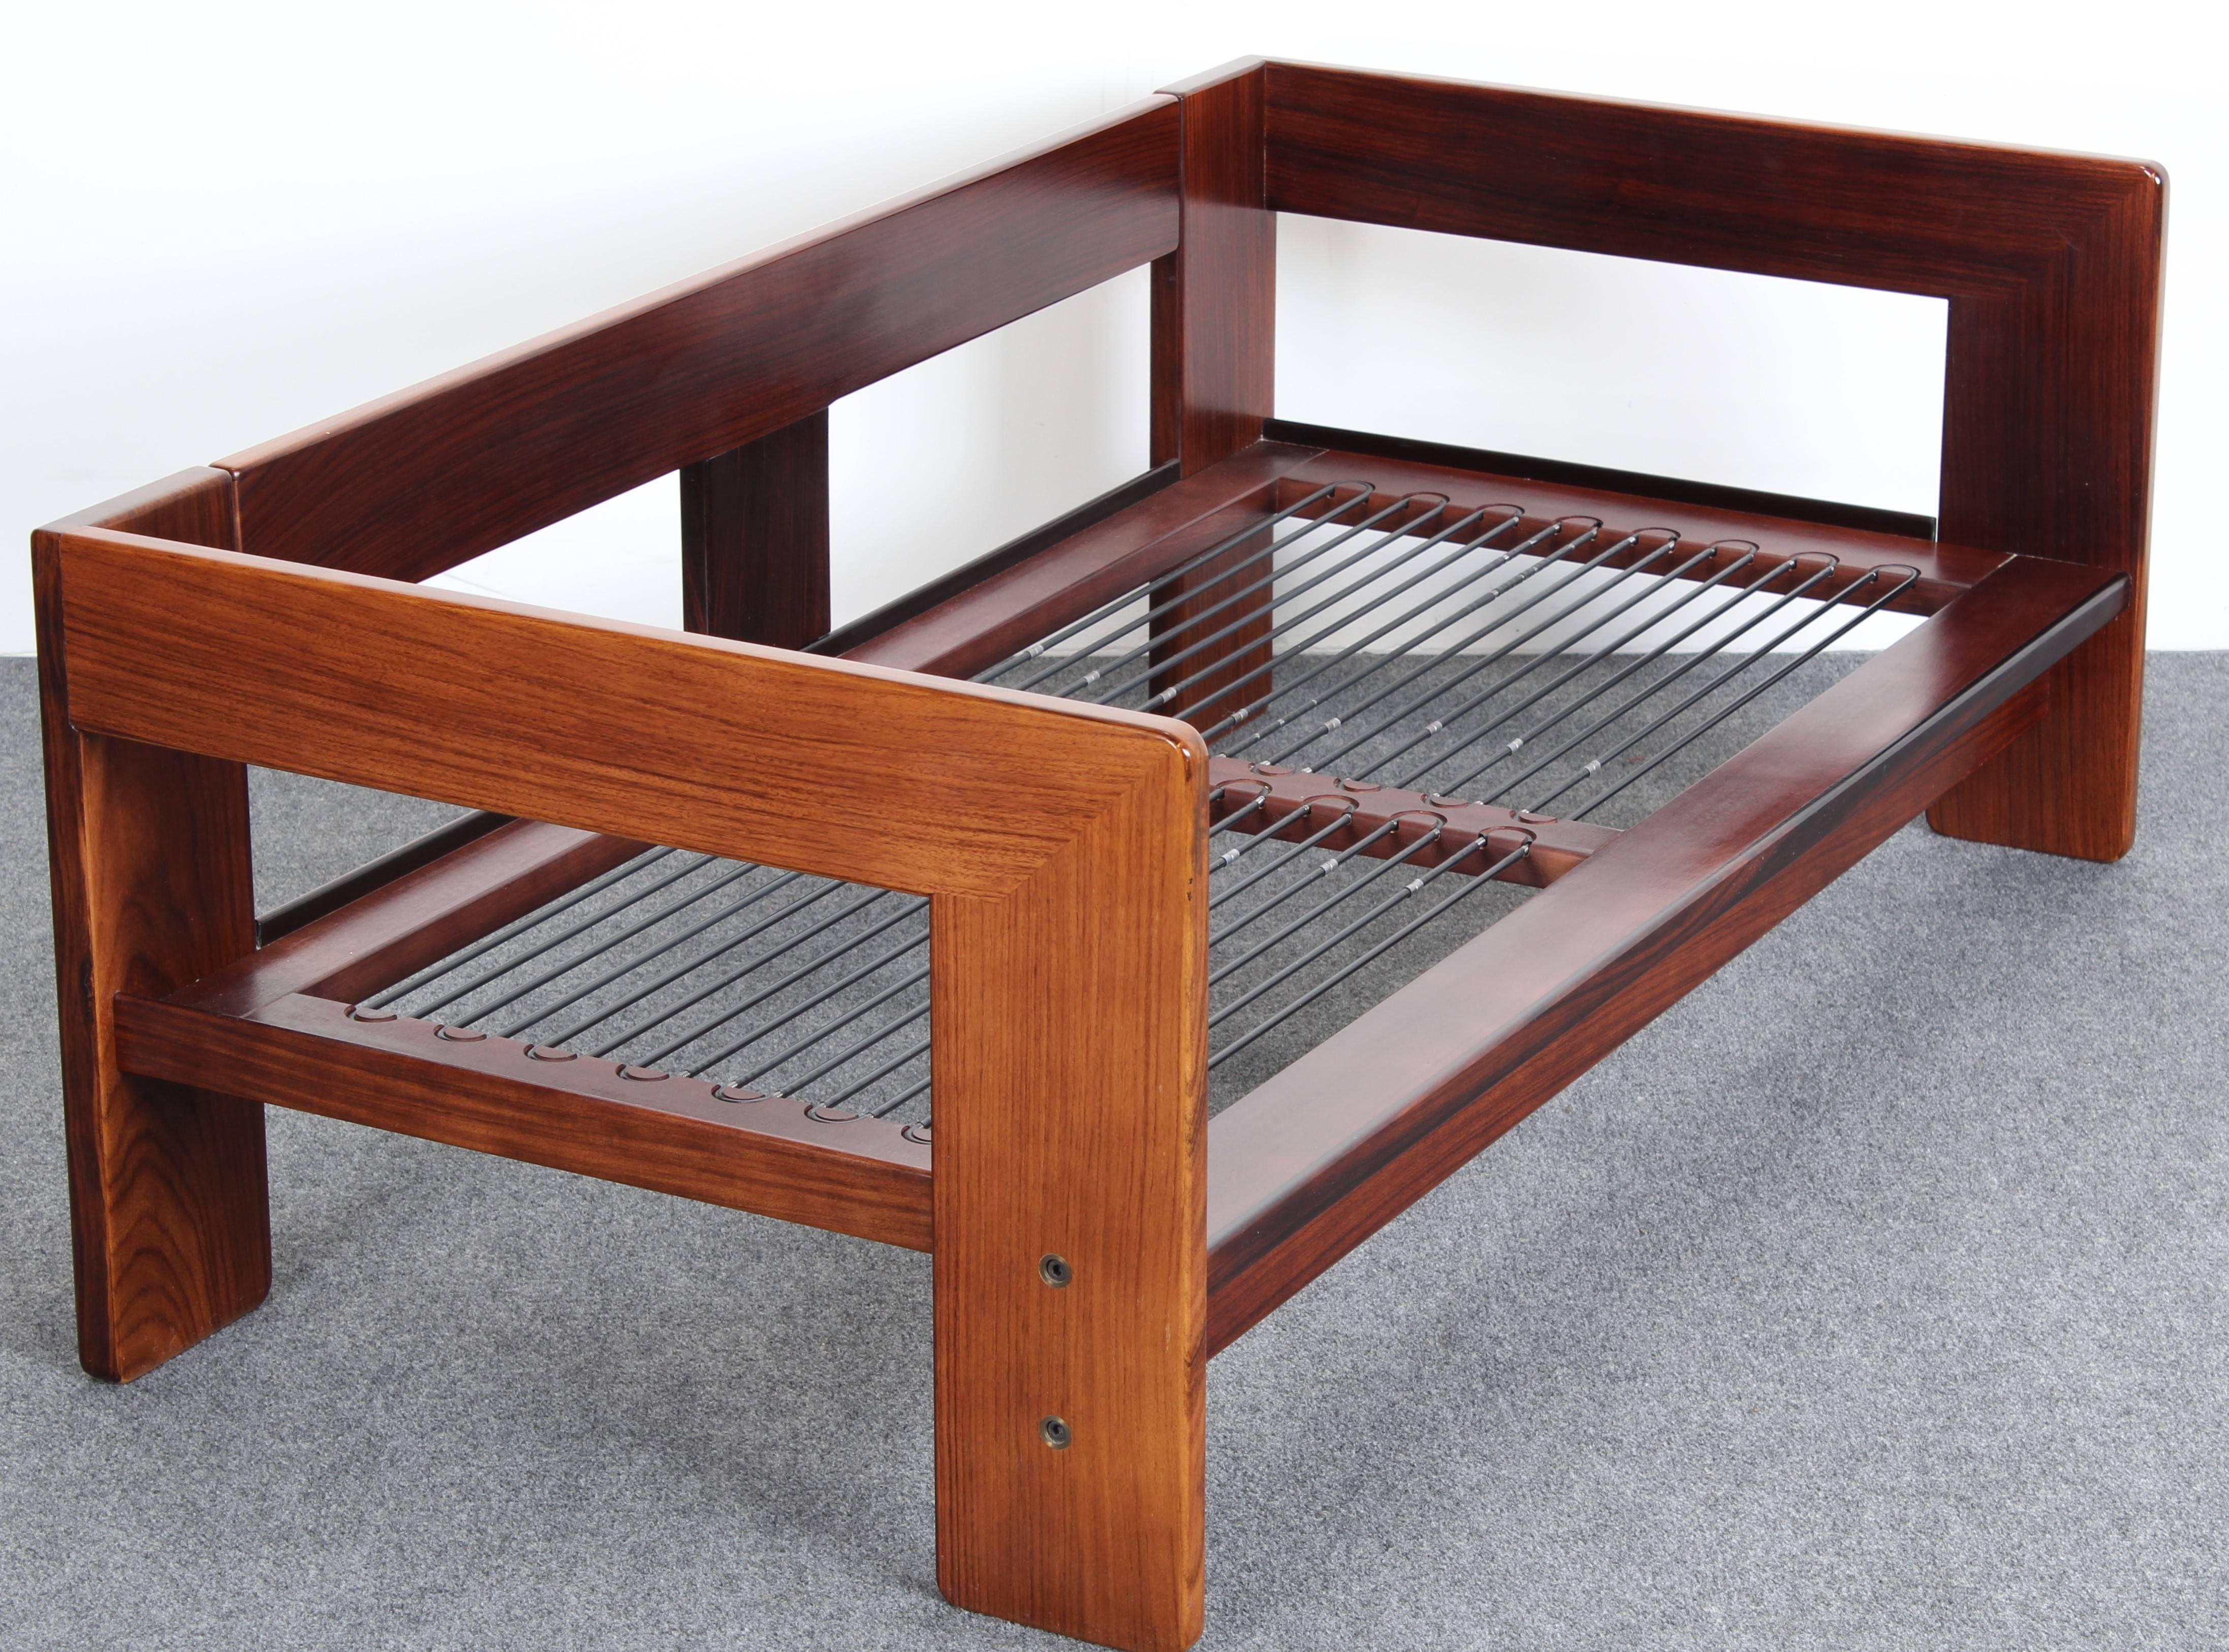 A Knoll solid rosewood "Bastiano" settee frame designed by Tobia Scarpa. Requires new cushions. Some fading to sides of settee. Frame is in good condition.